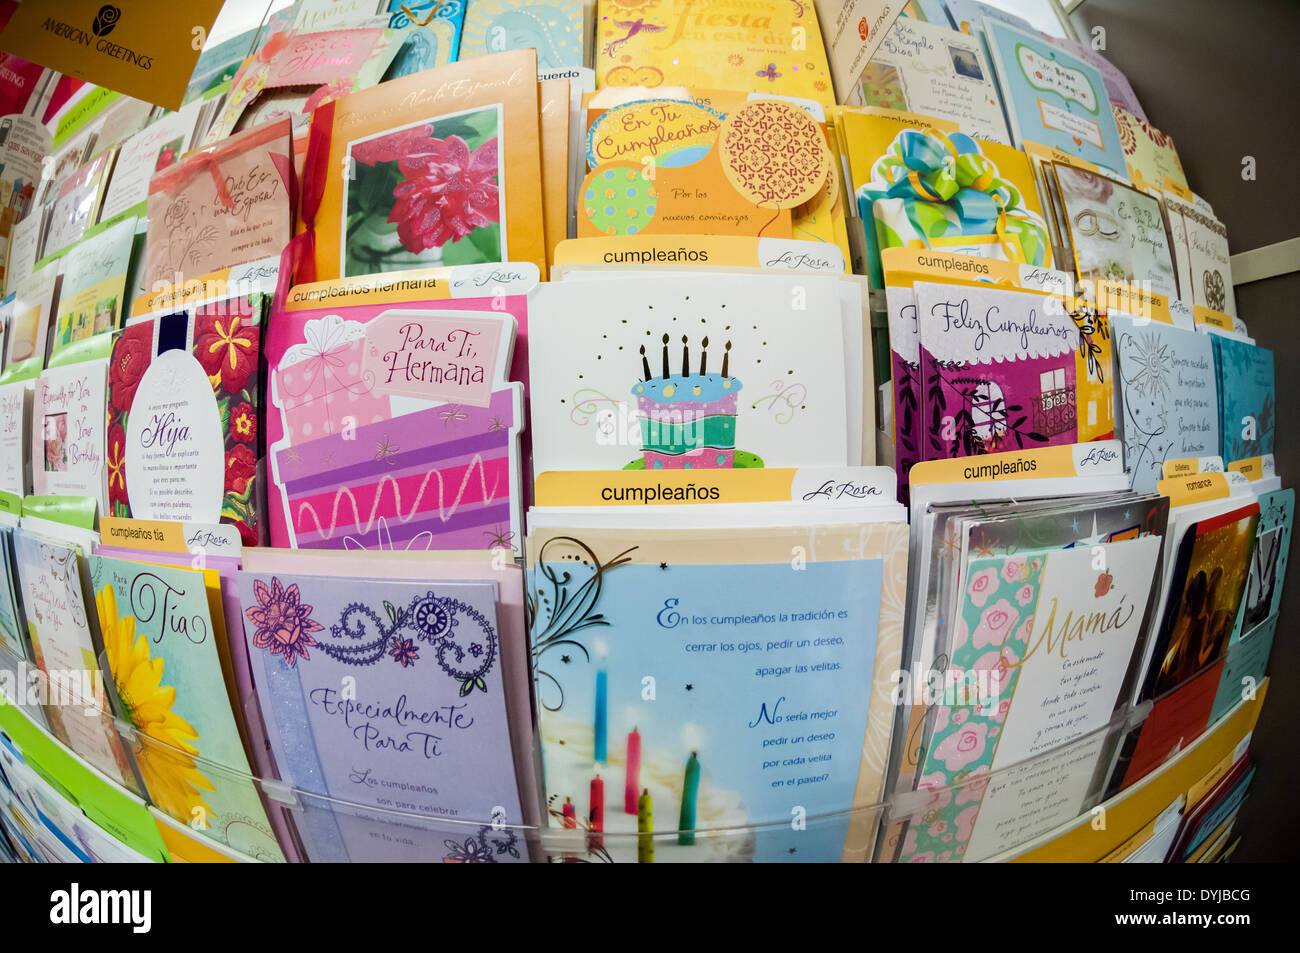 Spanish language greeting cards are seen in a a display in a store in New York on Stock Photo